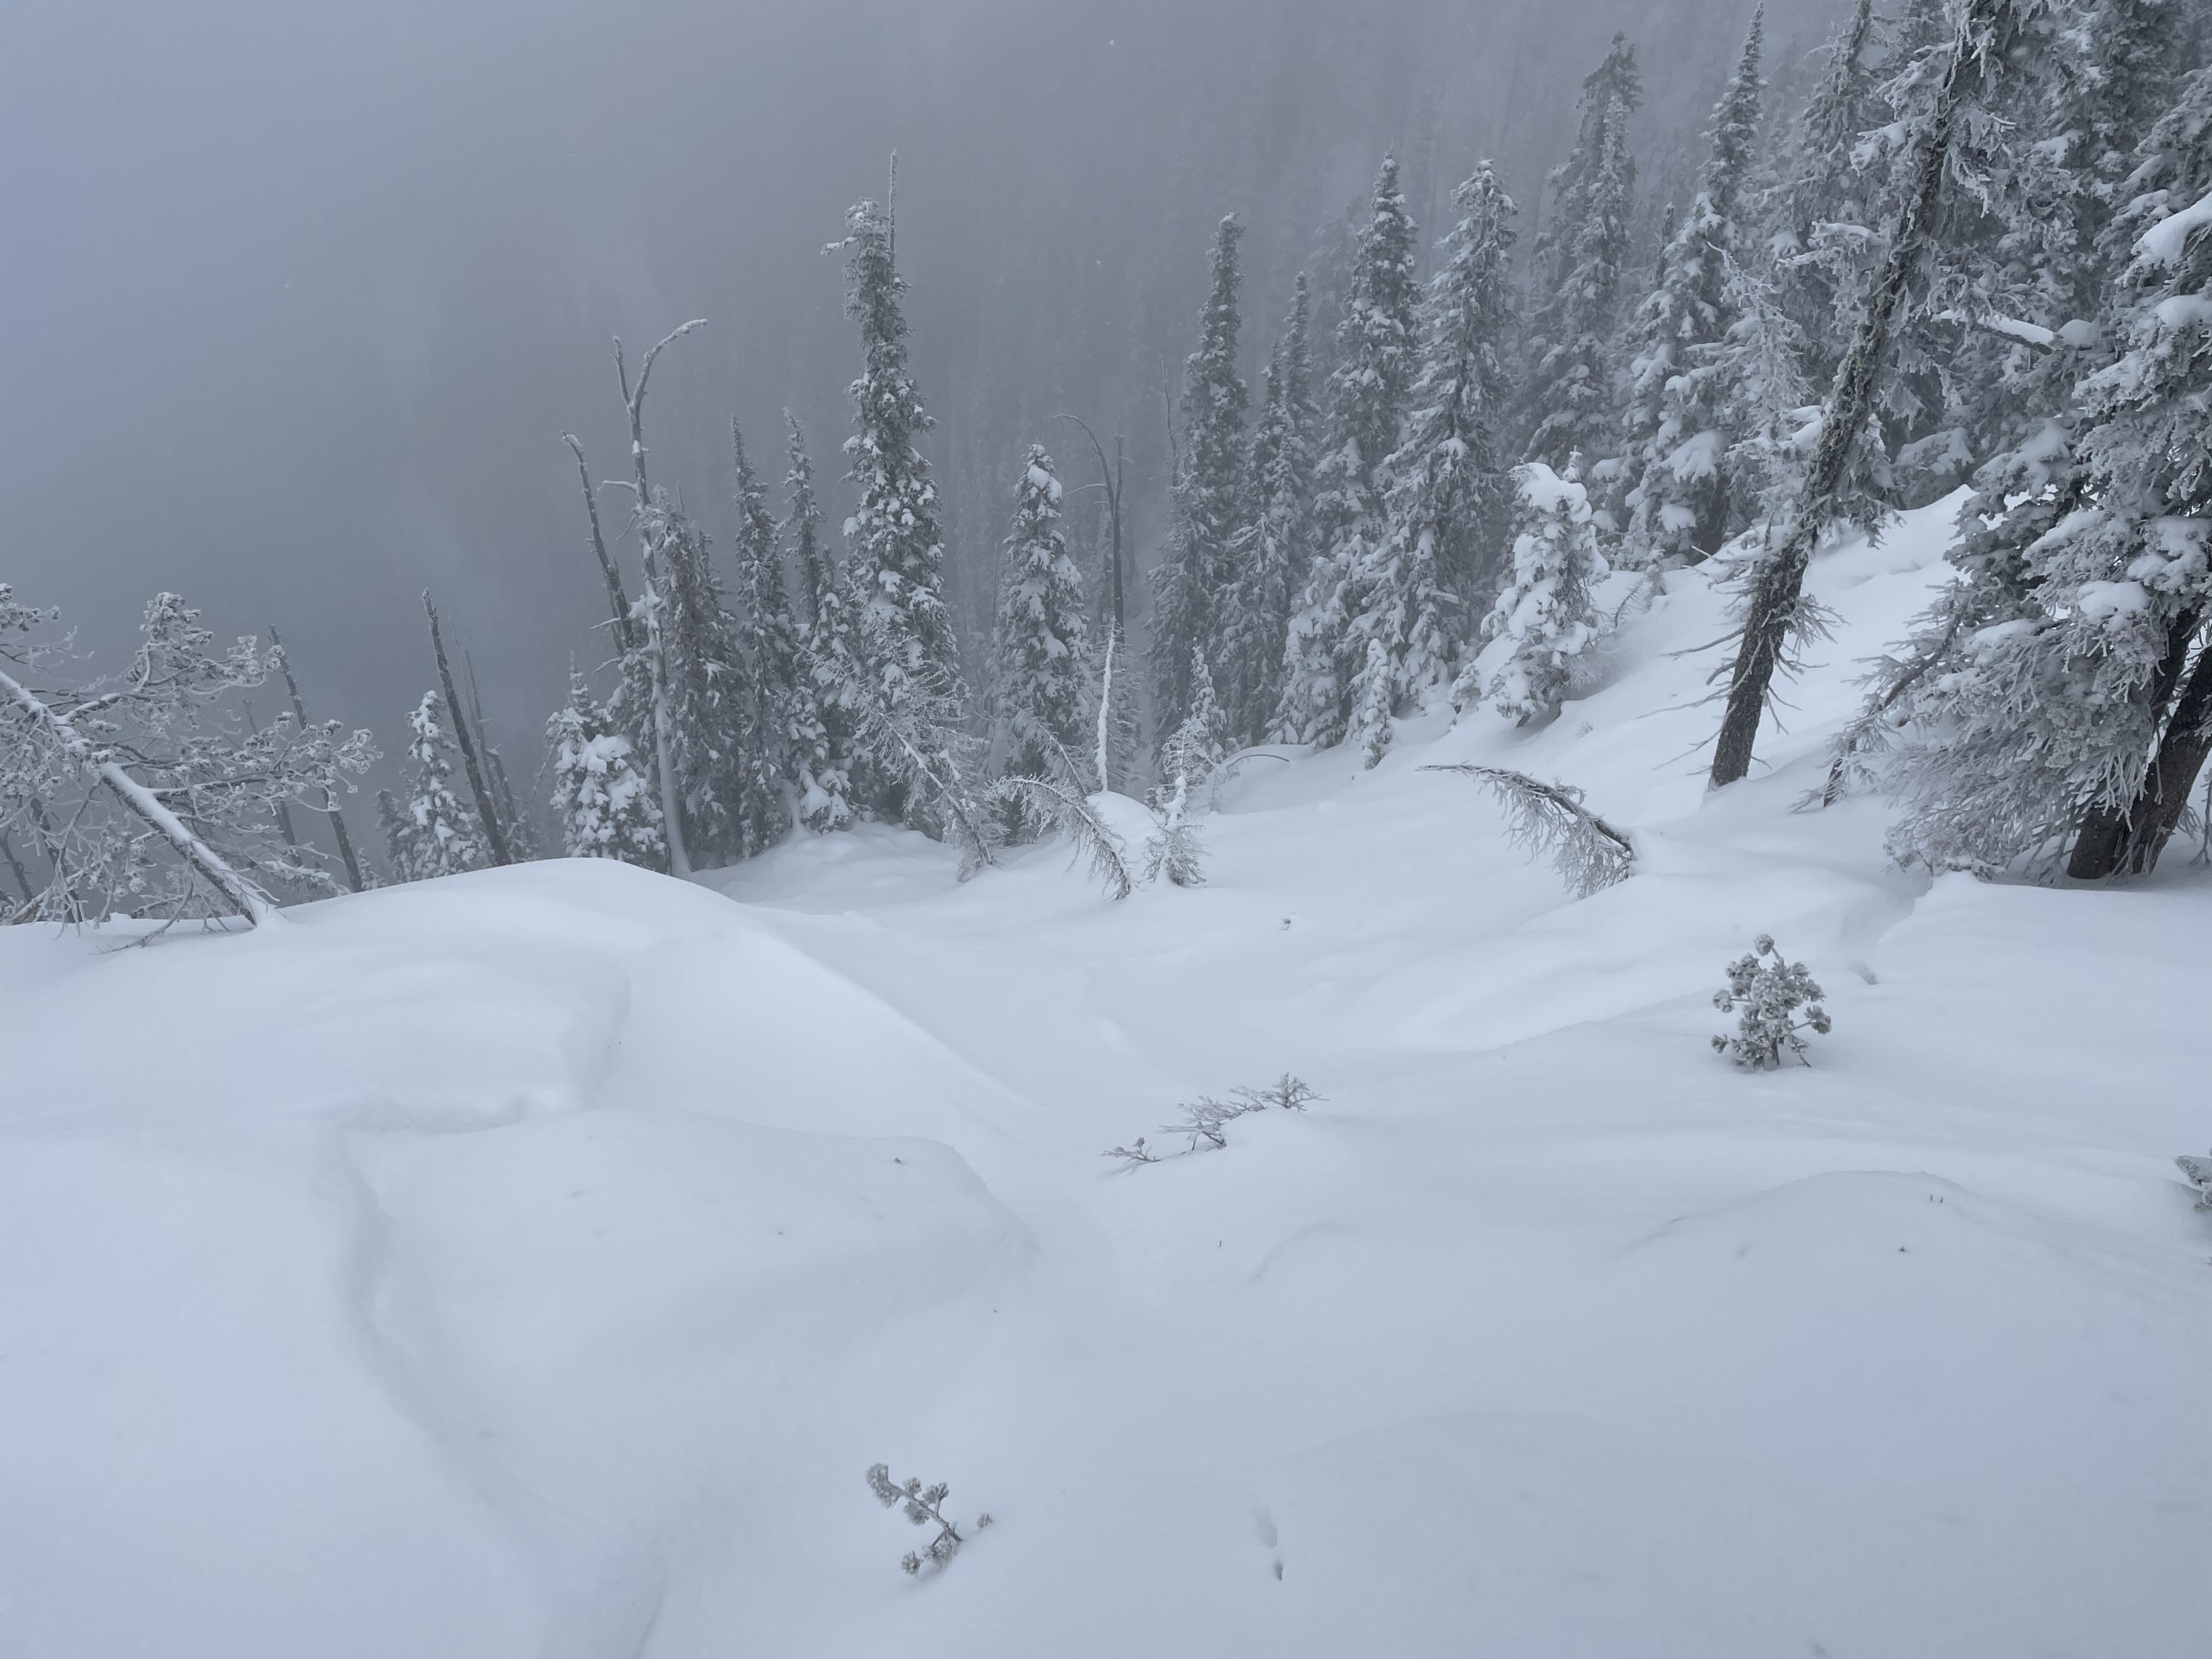 Dec 5, 2022: <p>Natural D2 persistent slab avalanche from late last week on a N aspect at 7,400 ft. </p>
